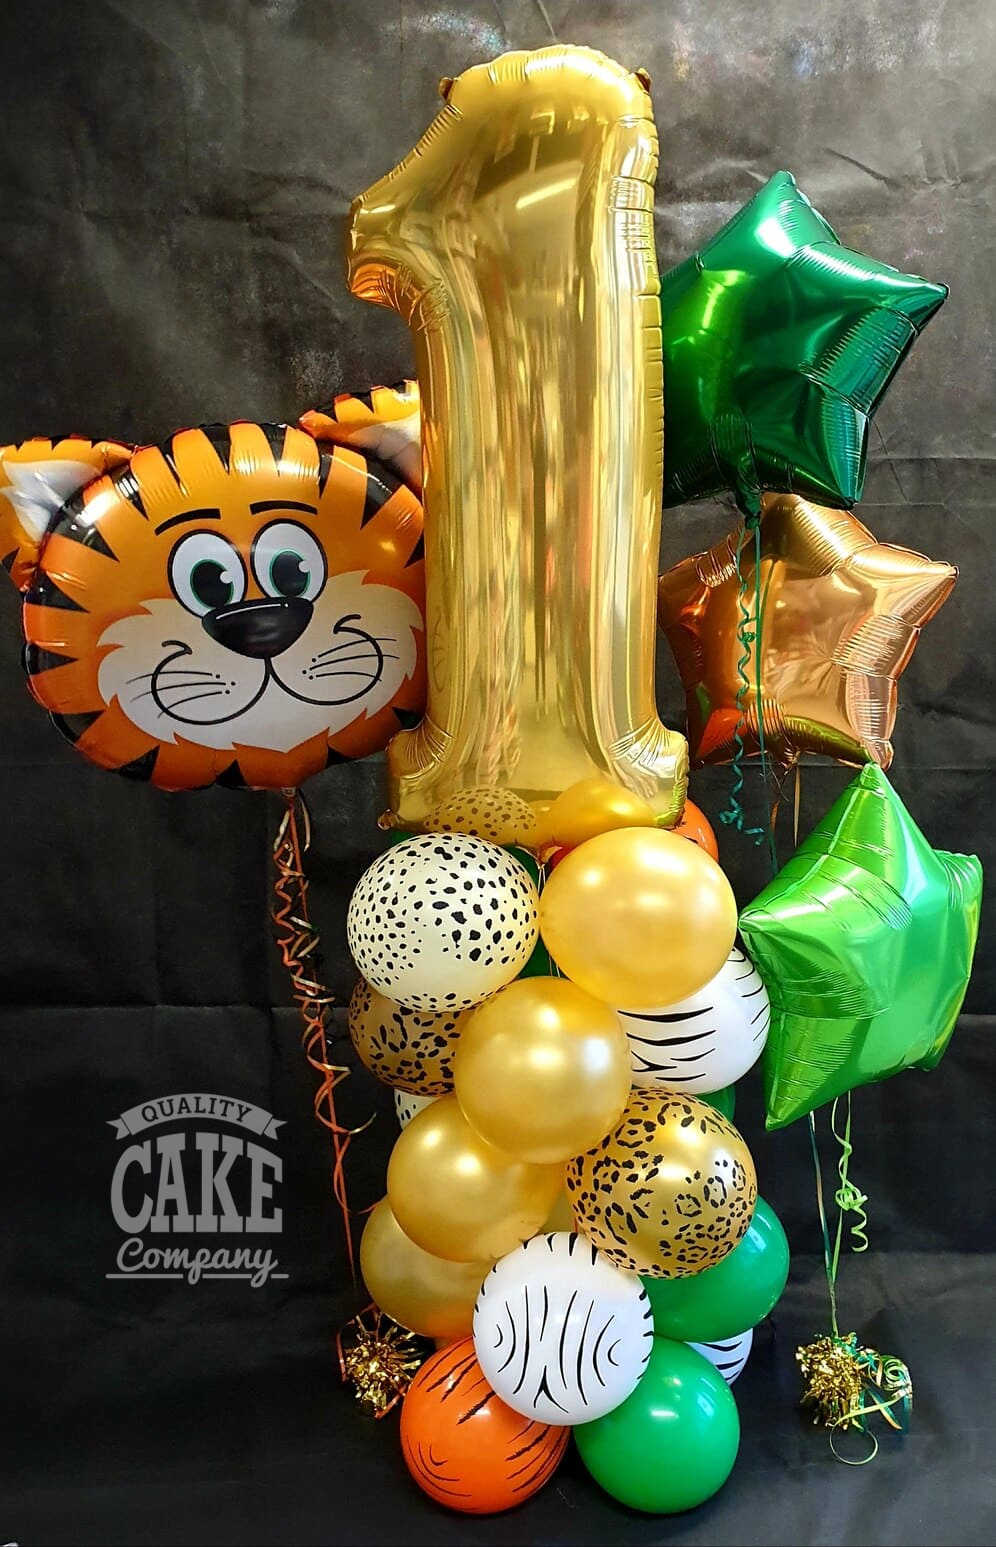 Today's Alice in wonderland party - Lisas Helium Balloons